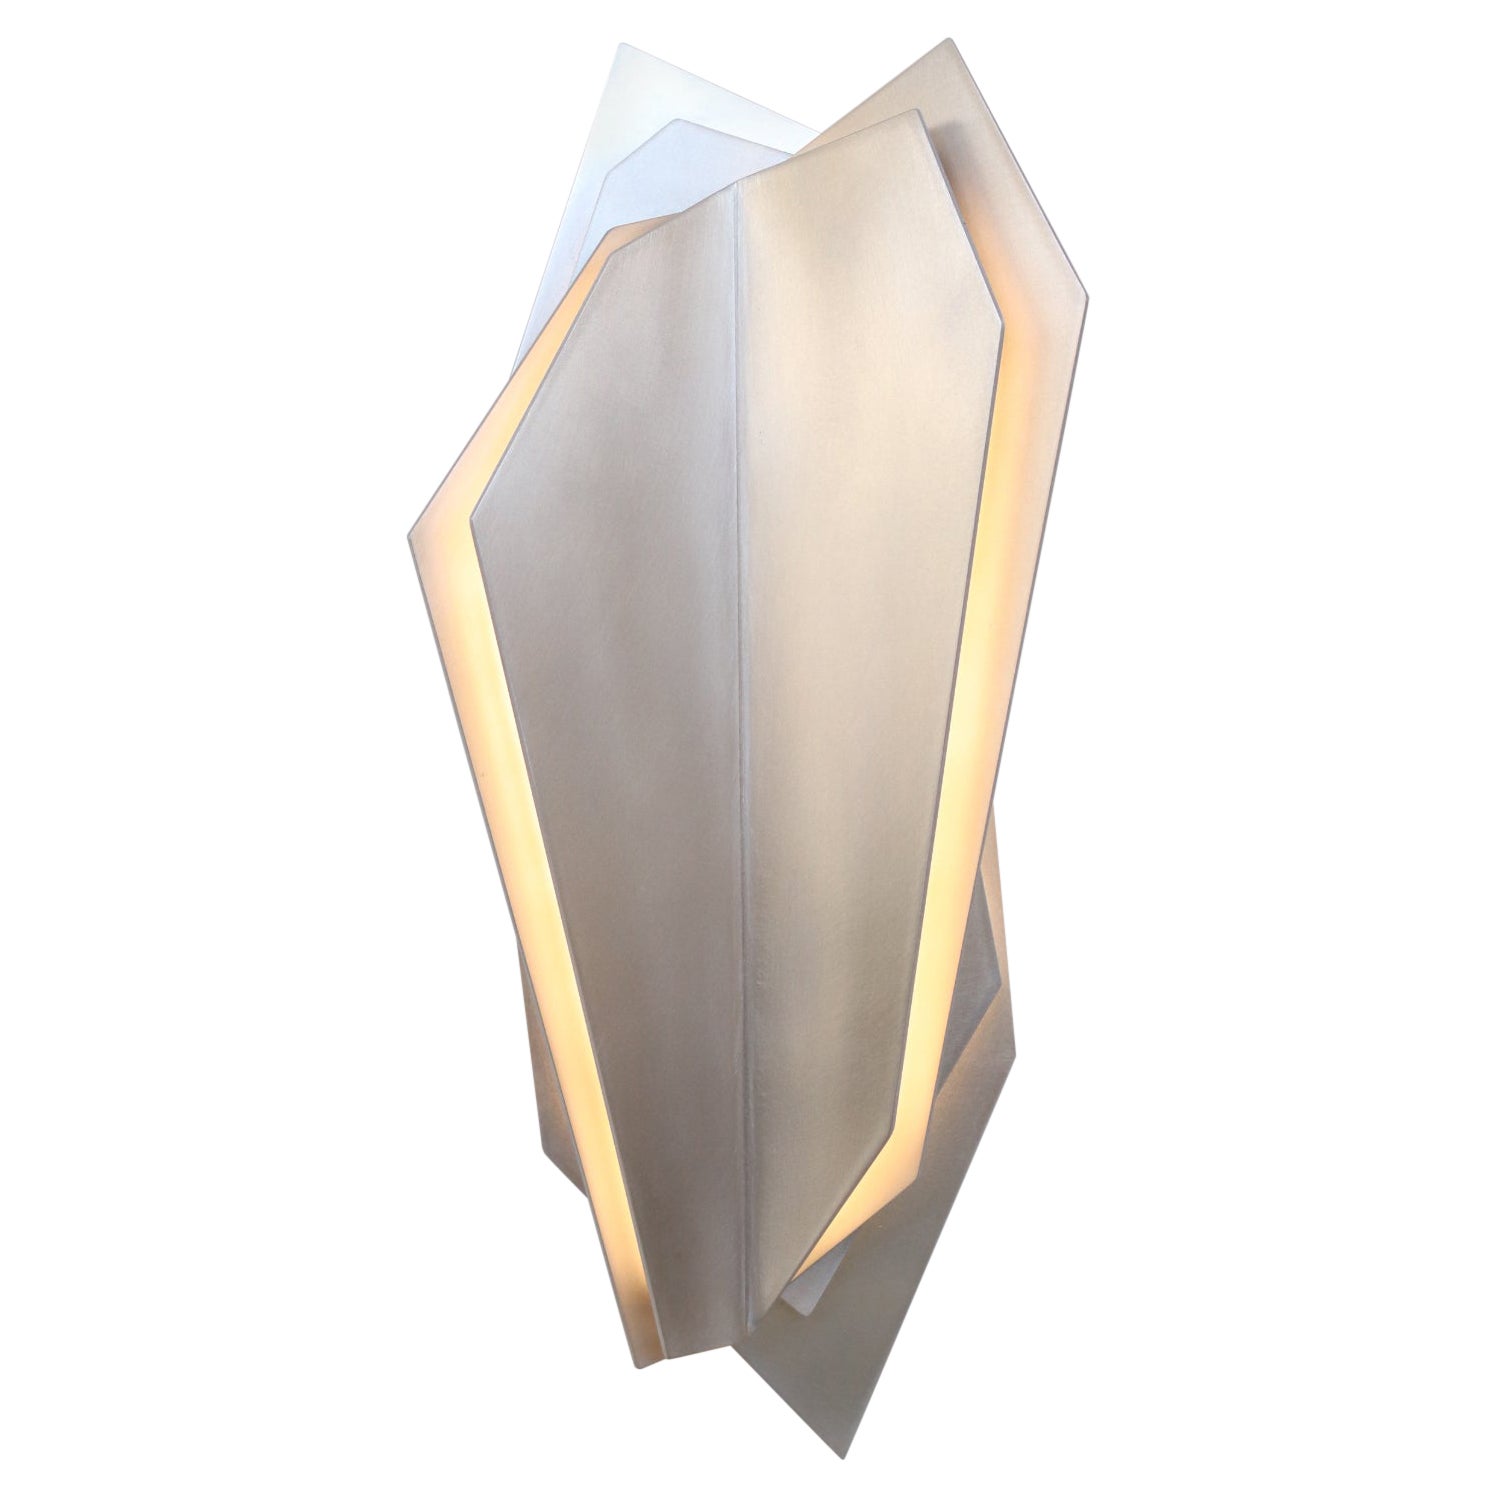 Continuum 500 Wall Sconce by Lost Profile Studio For Sale